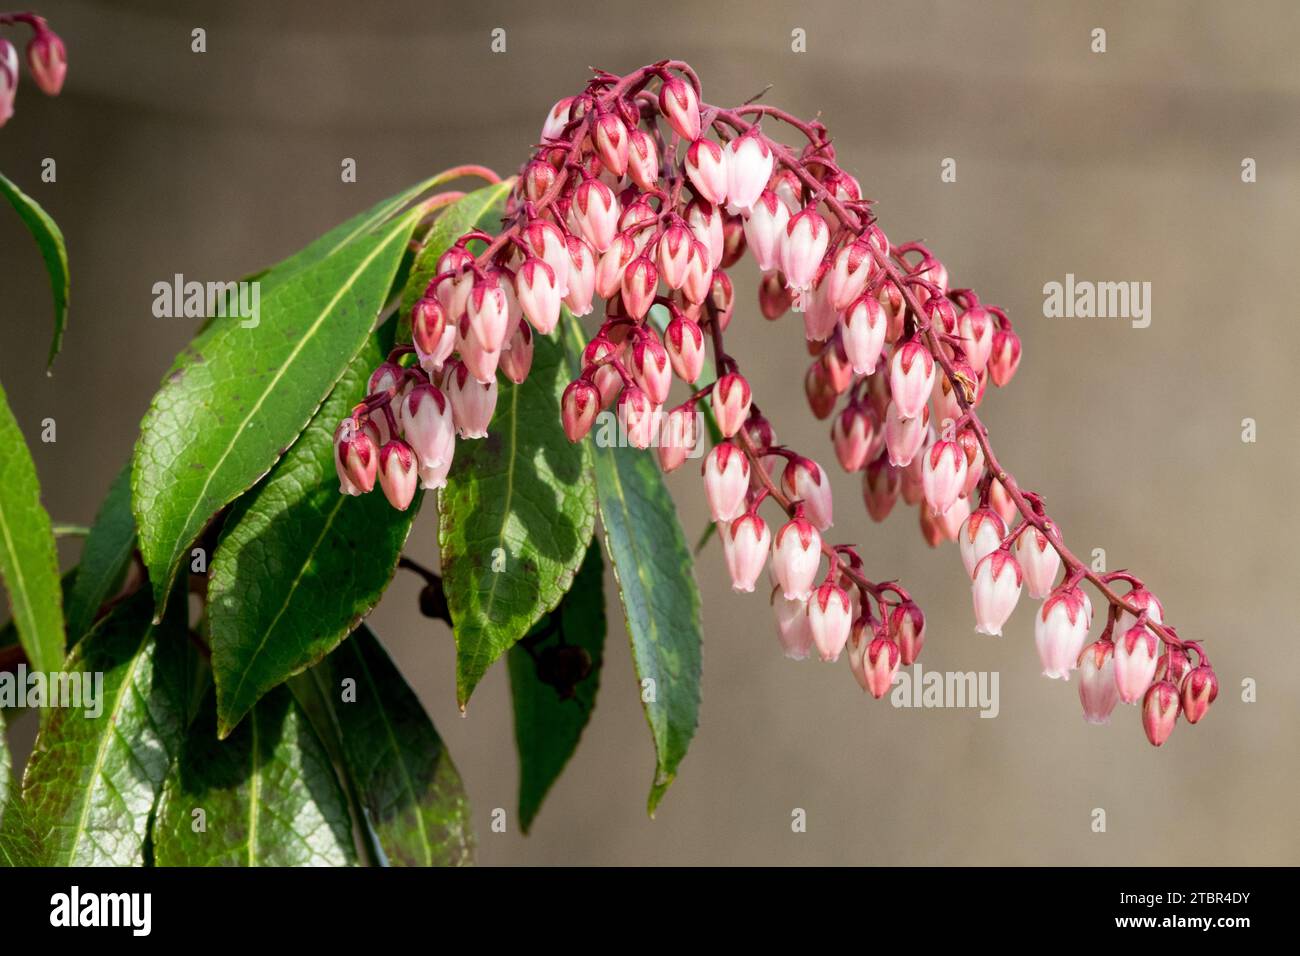 Late February blooming shrub, winter flowering plant Japanese andromeda, Lily of the Valley Shrub, Japanese Pieris japonica 'Dorothy Wyckoff' pink Stock Photo